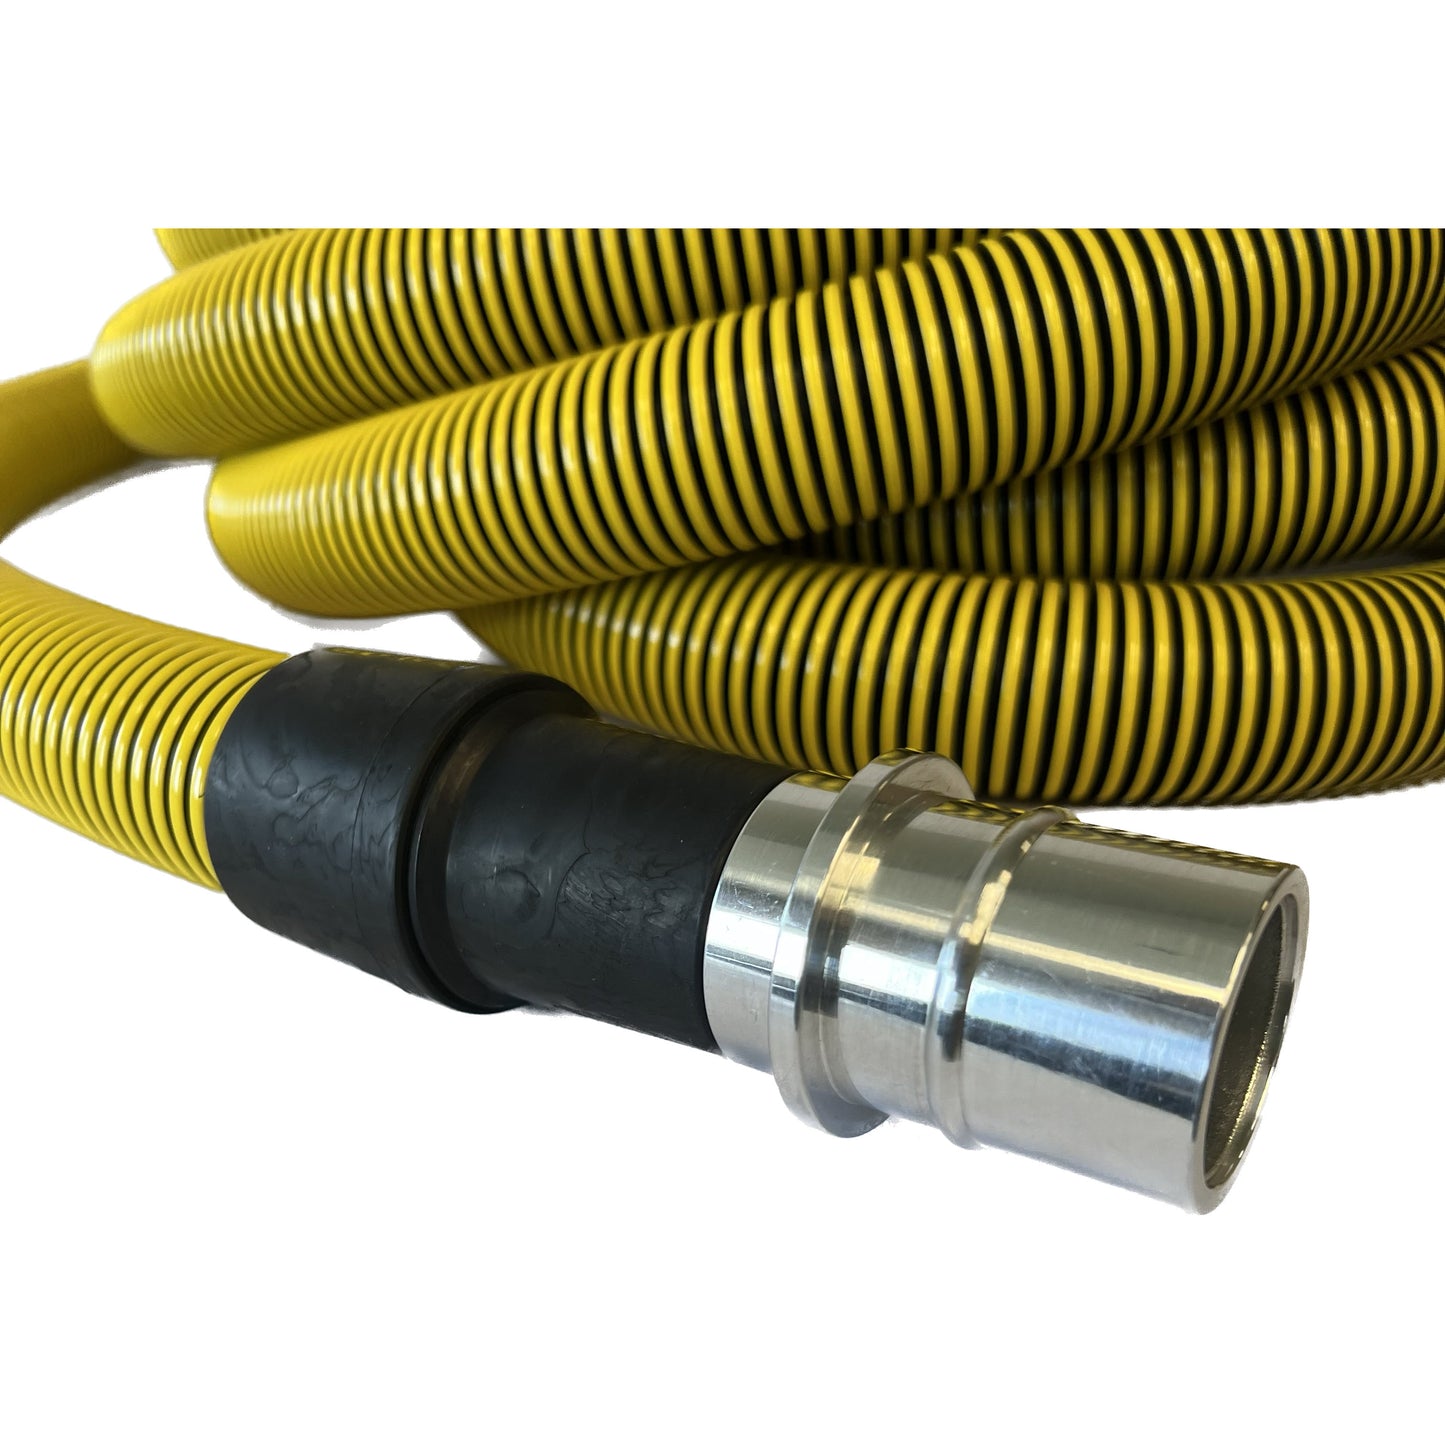 1-1/2" Conductive Vacuum Hose with Swivel Cuffs, Flexaust Genesis® StatPath® Plus Hose, Black and Yellow, 10', 15', 25' and 50' Lengths, Fits Latching and Non-Latching Inlet Valves